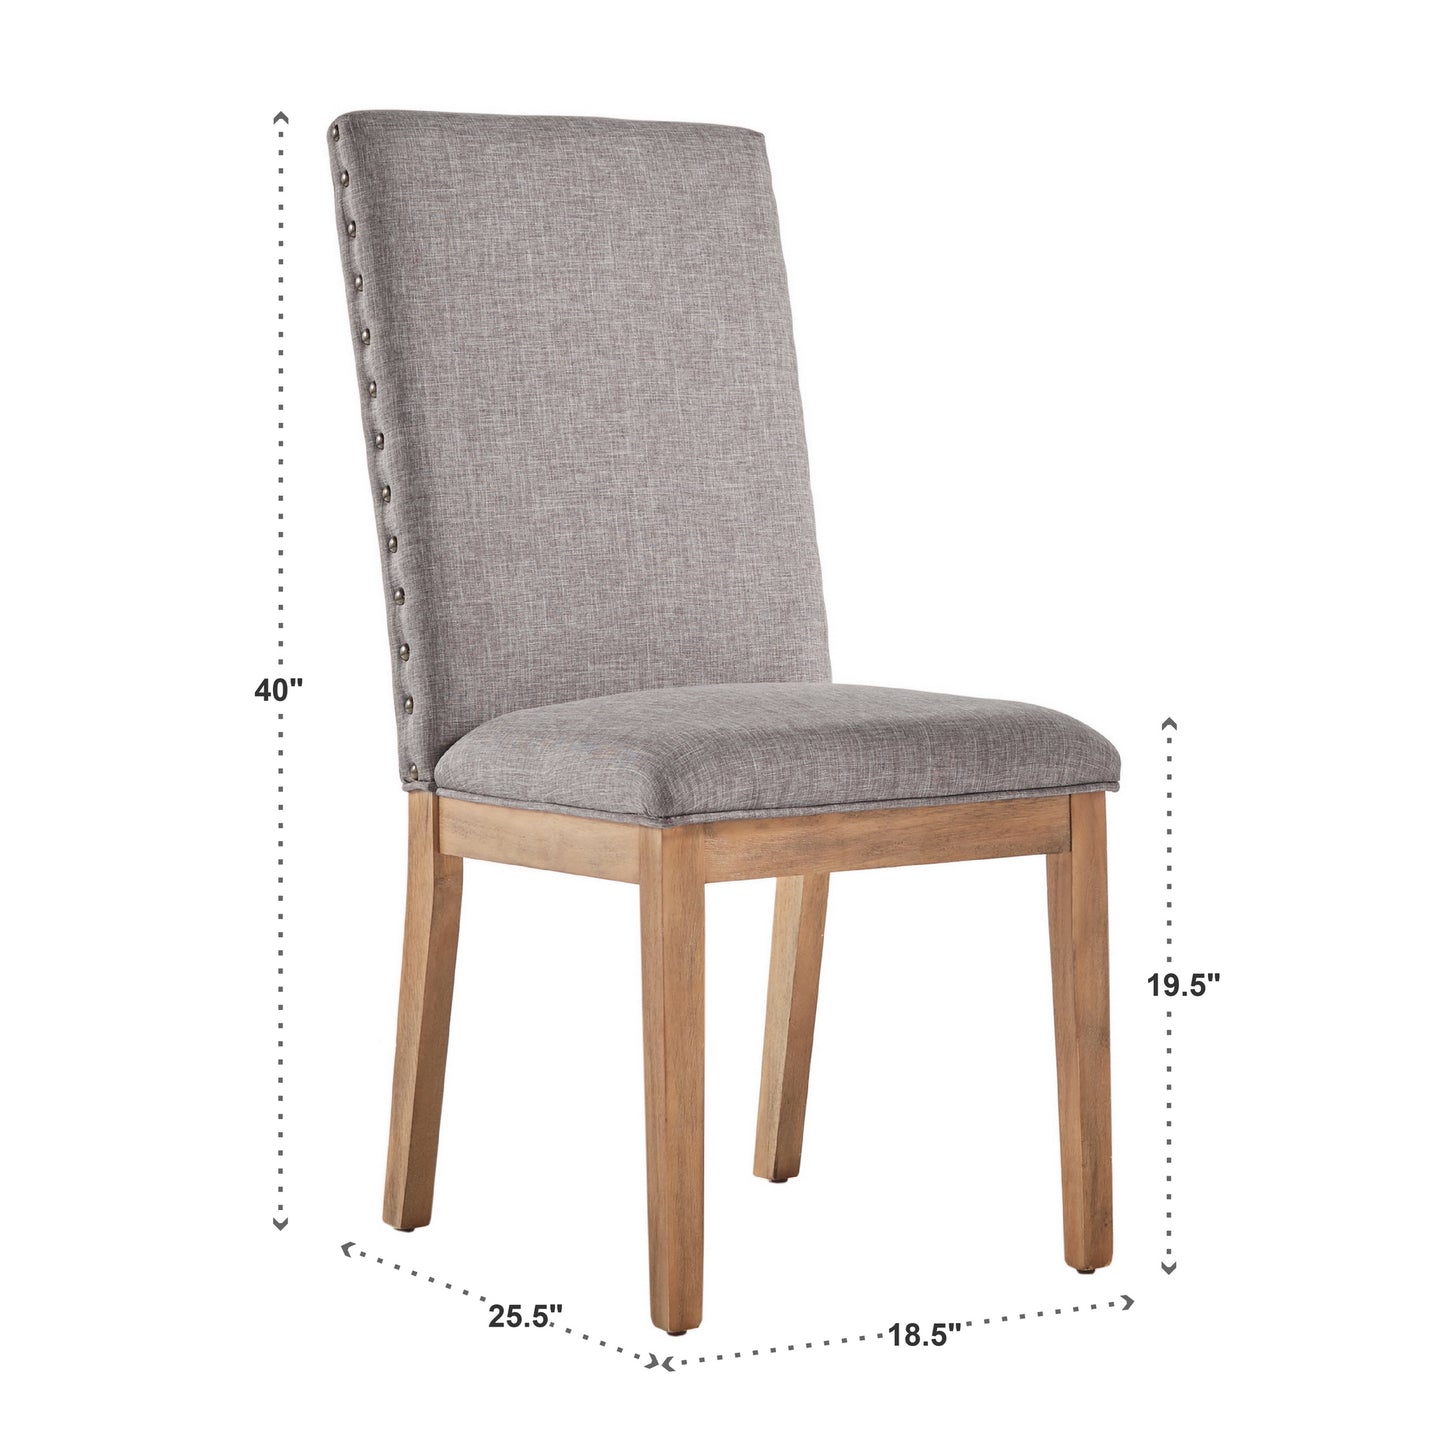 Nailhead Accent Parson Linen Dining Chairs (Set of 2) - Grey Linen, Natural Finish